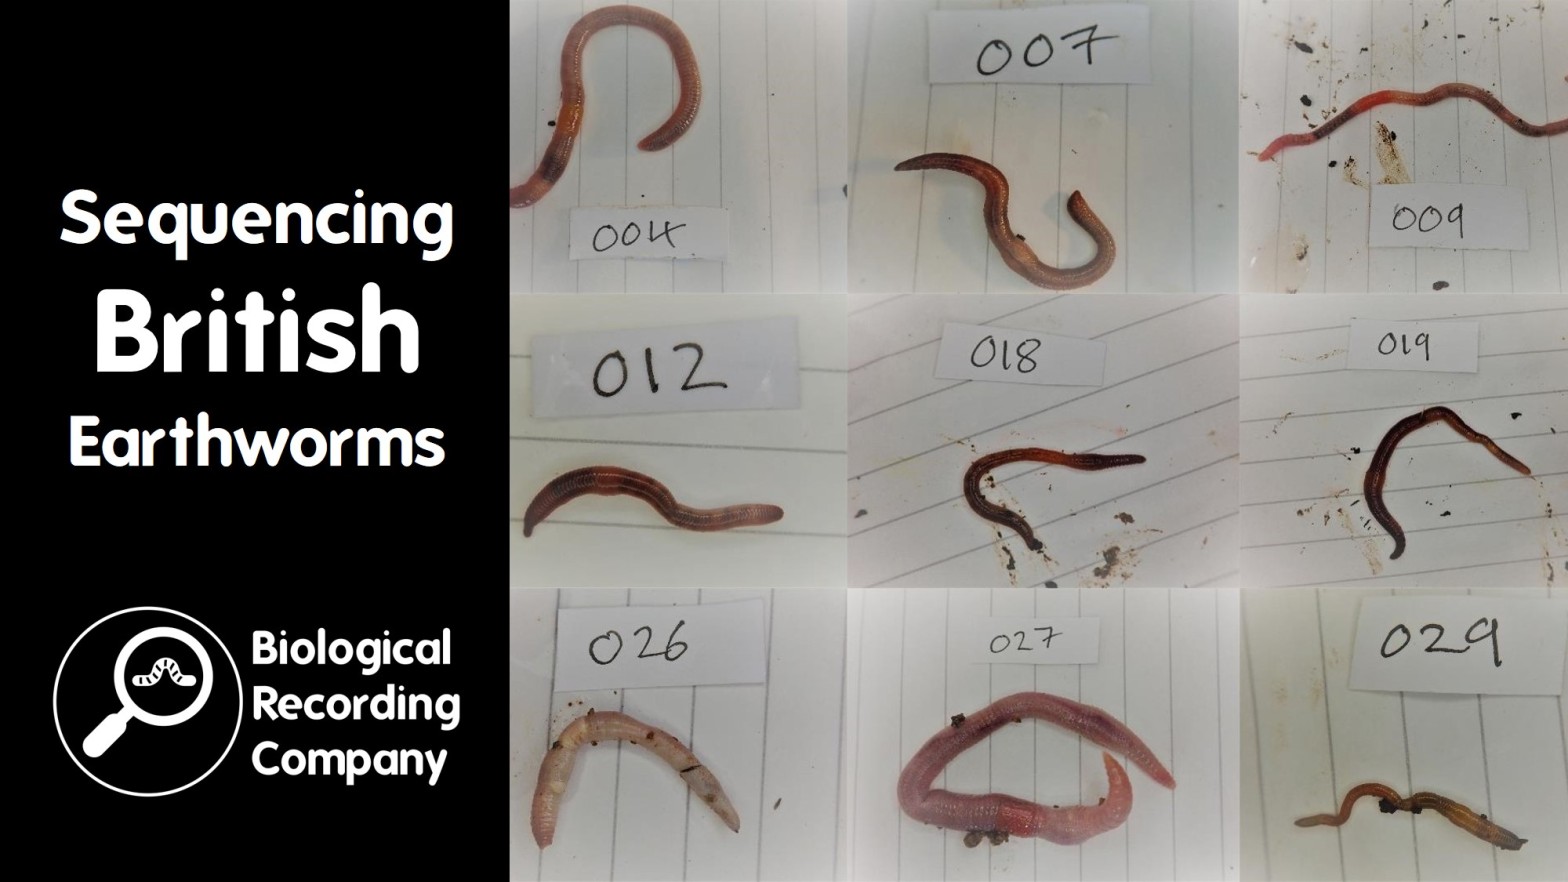 Sequencing British Earthworms – Biological Recording